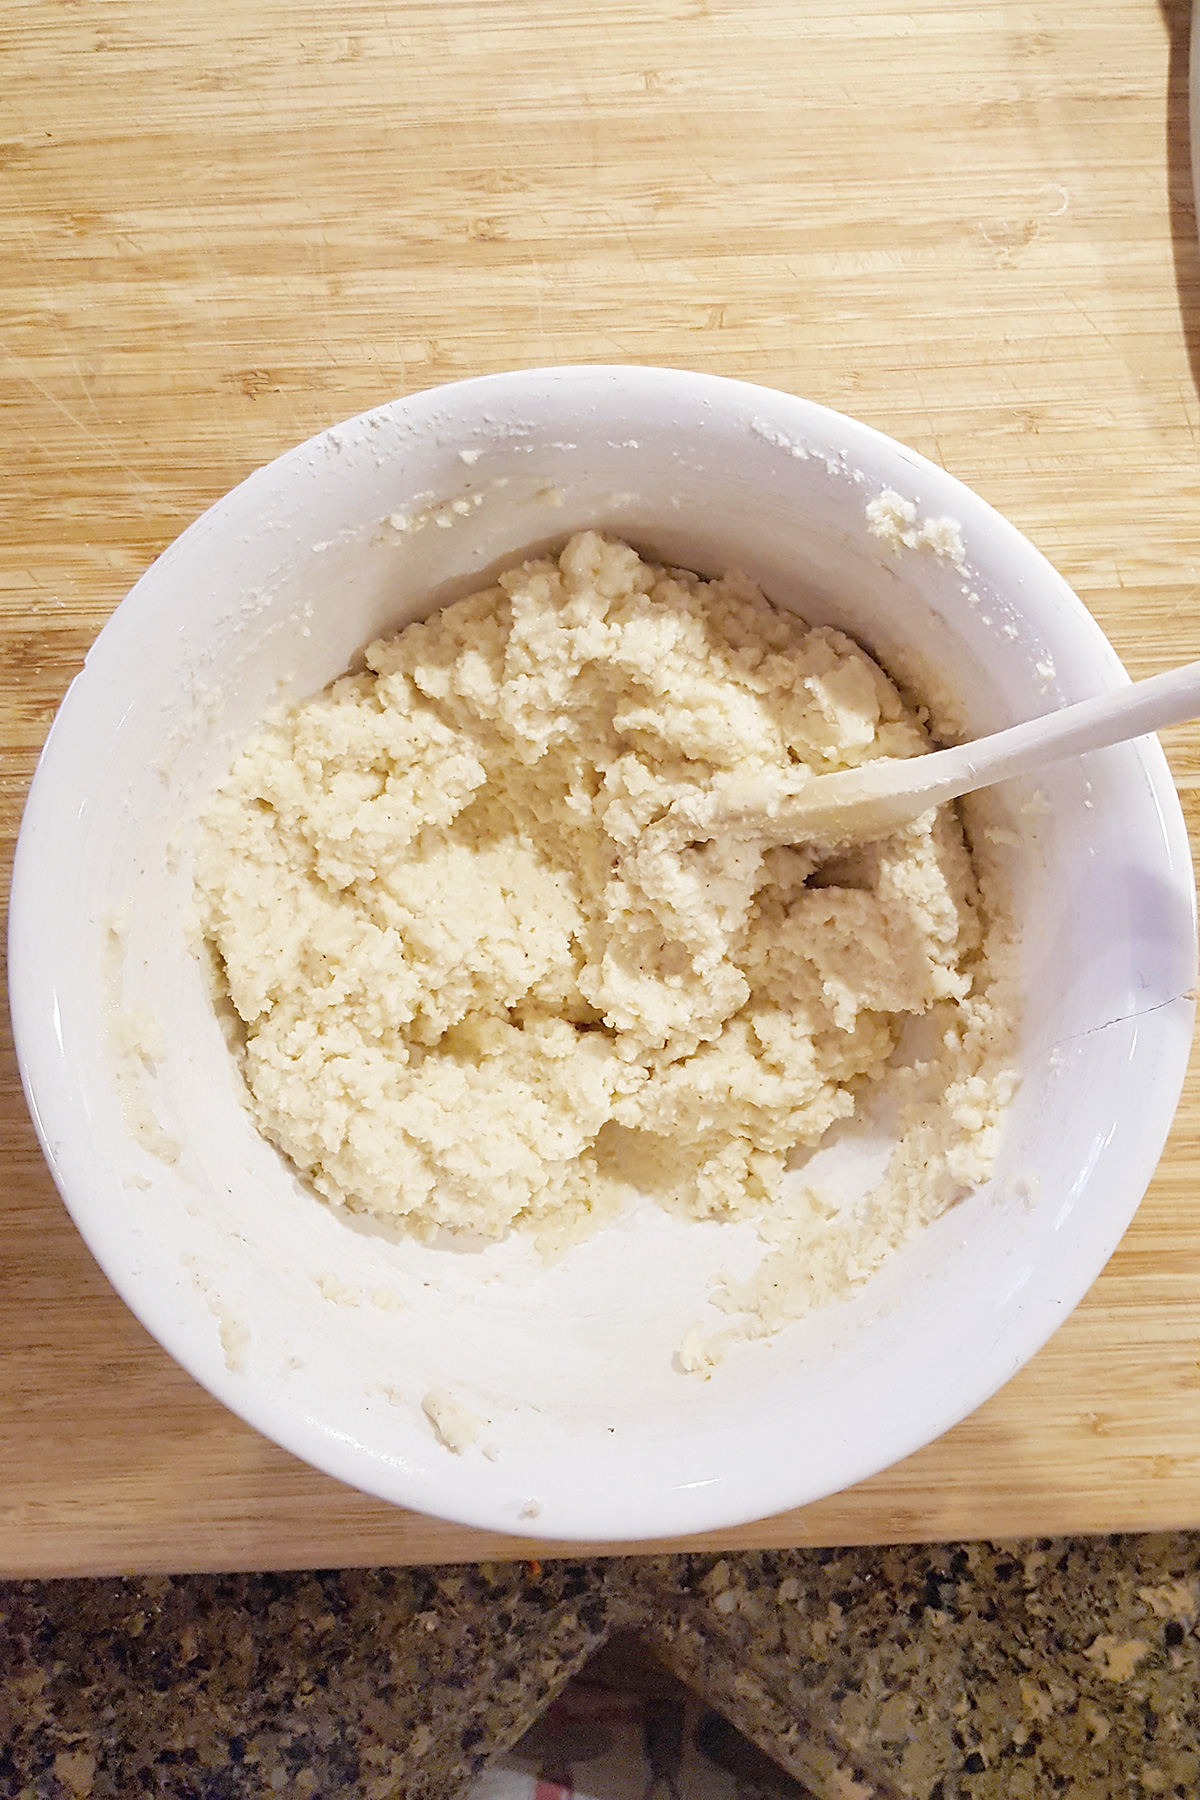 Cornmeal batter and a wooden spoon in a mixing bowl.